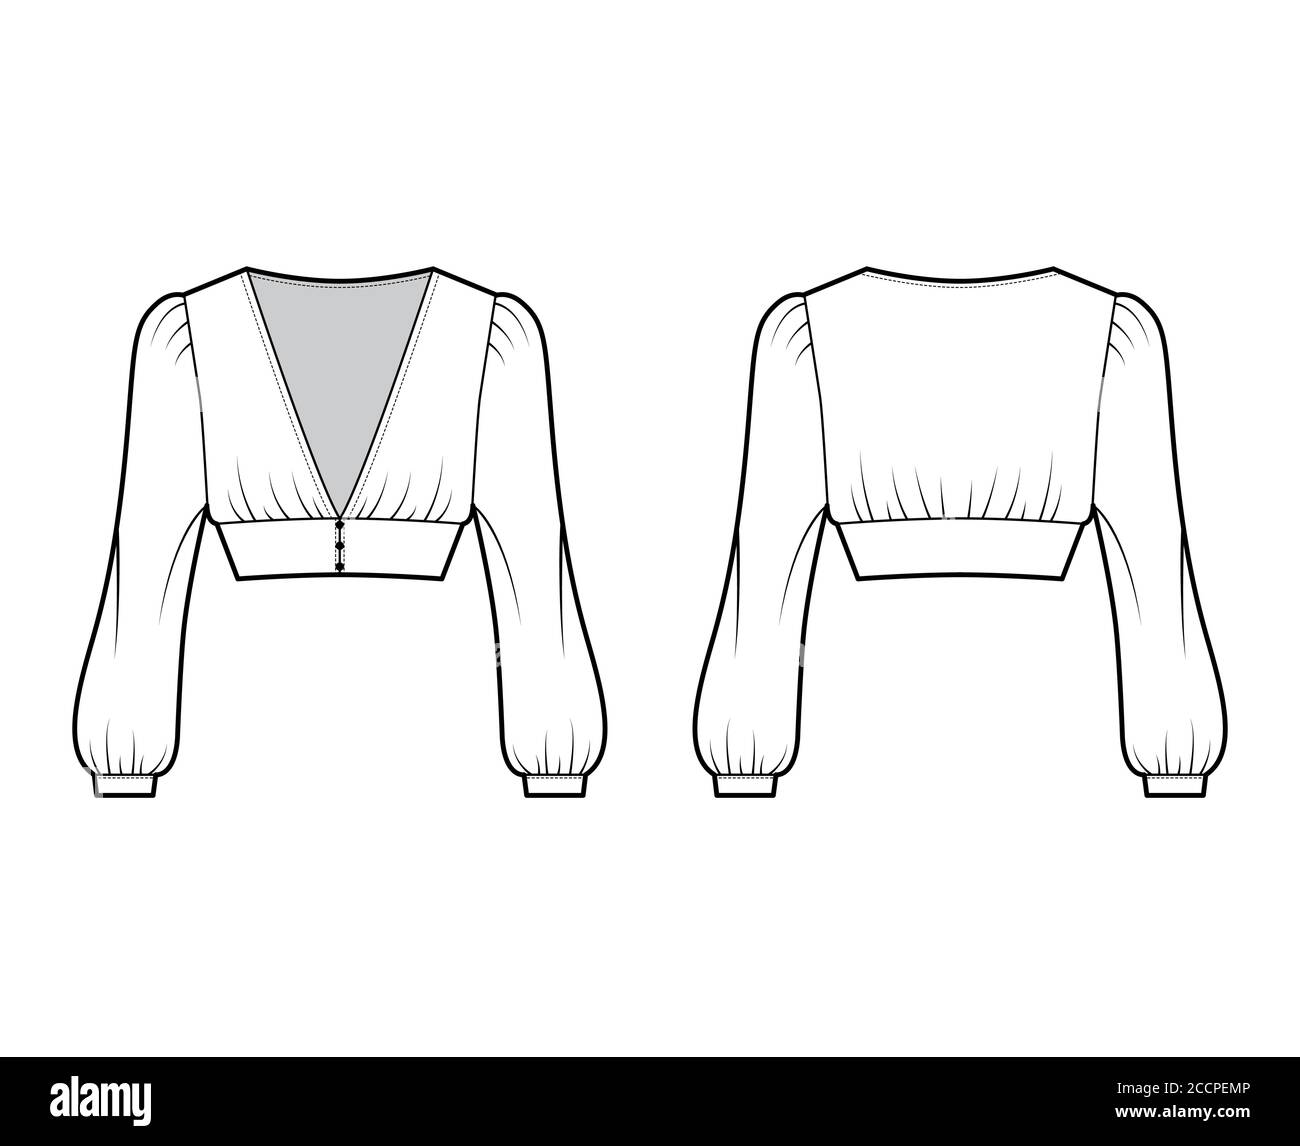 Cropped top technical fashion illustration with long bishop sleeves, puffed shoulders, front button fastenings. Flat apparel shirt template front back white color. Women men, unisex blouse CAD mockup Stock Vector